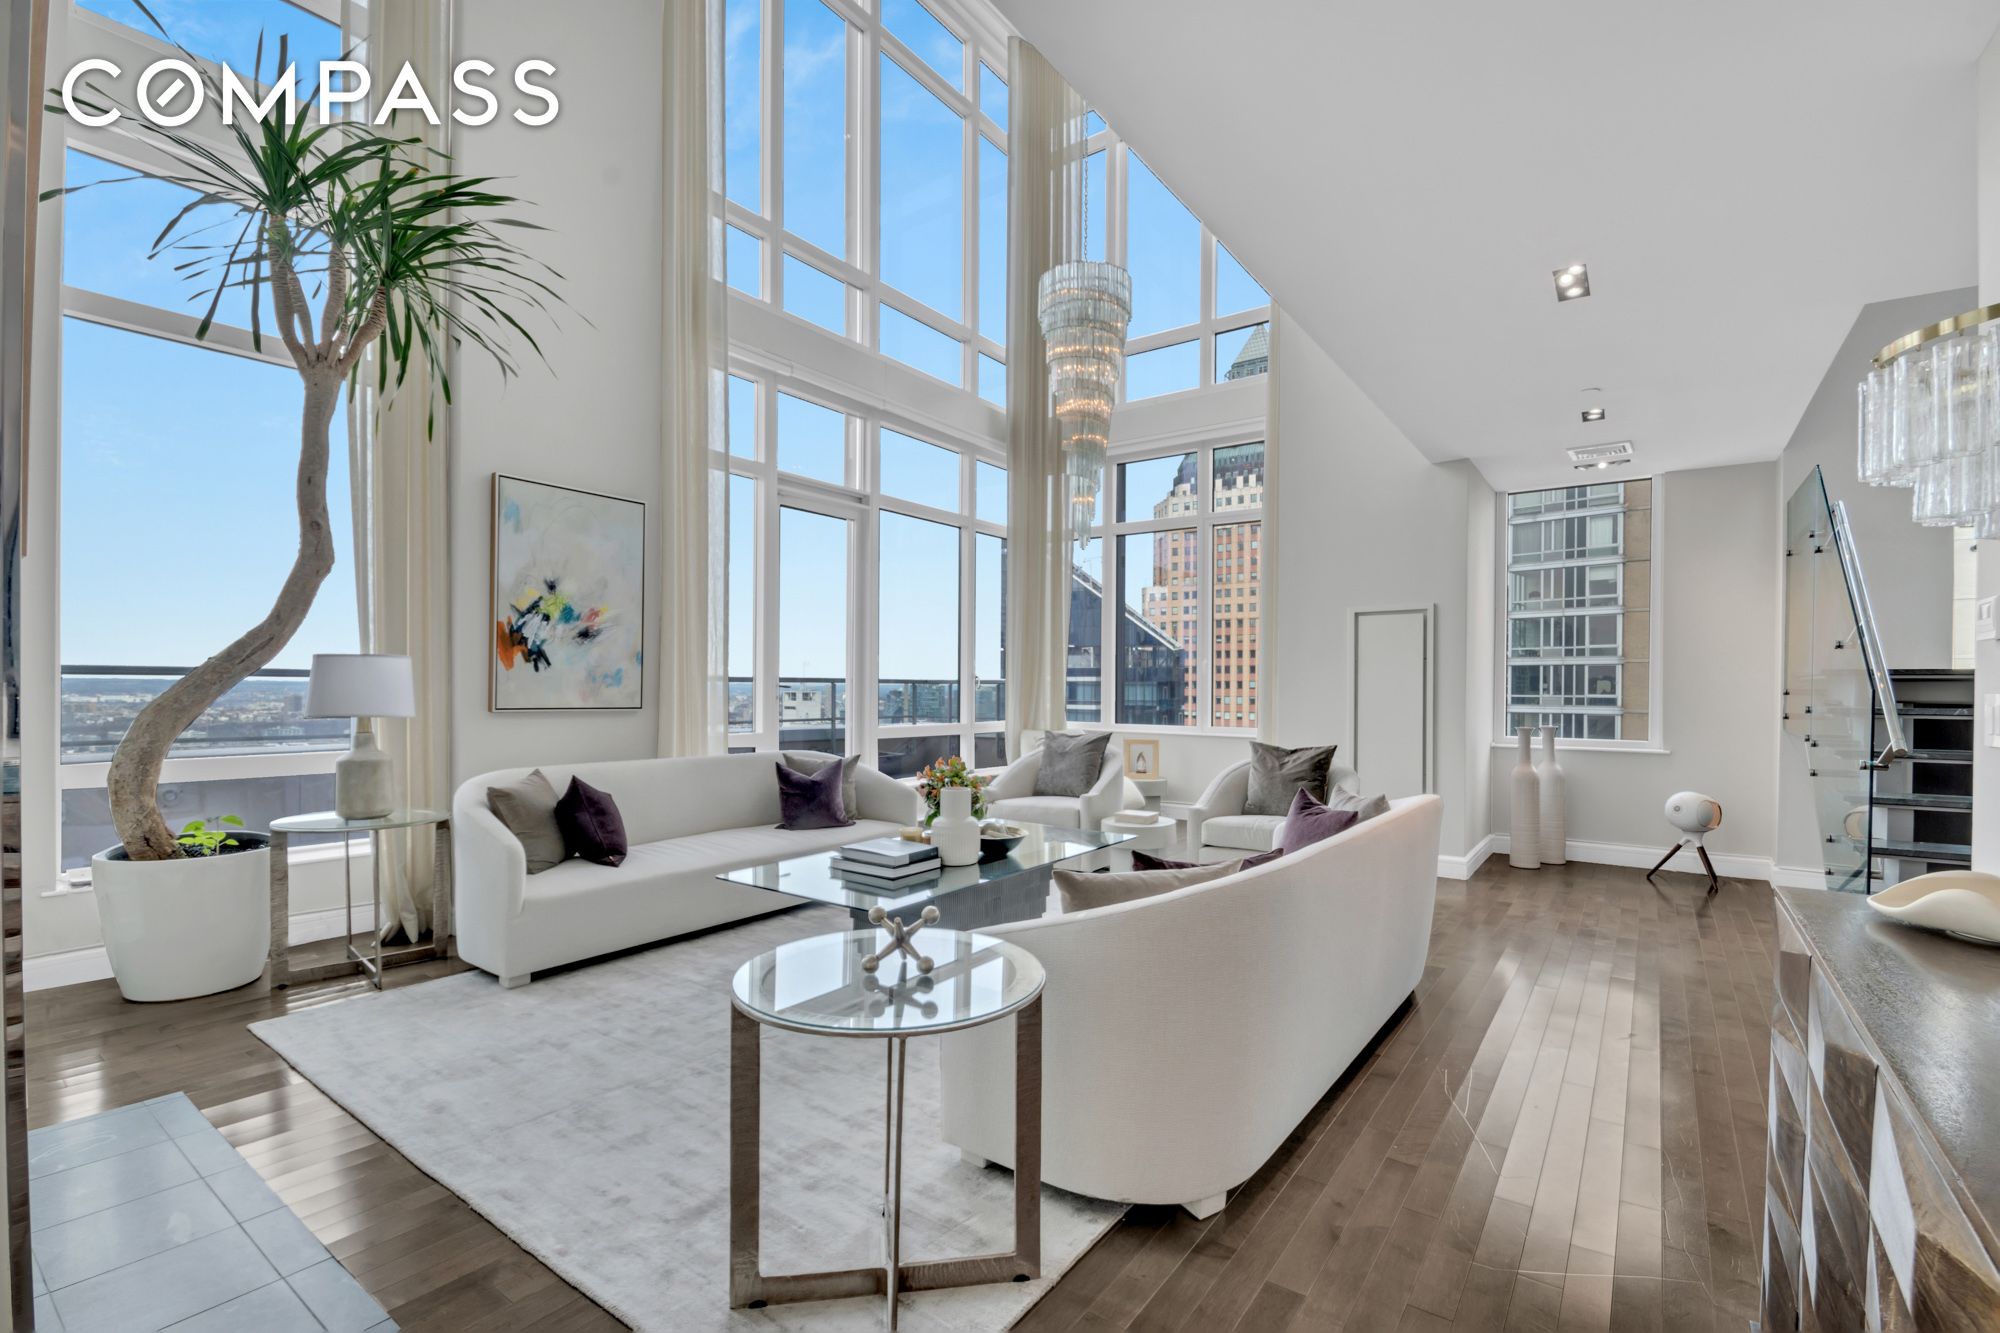 247 West 46th Street Ph2/4204, Theater District, Midtown West, NYC - 4 Bedrooms  
4.5 Bathrooms  
9 Rooms - 